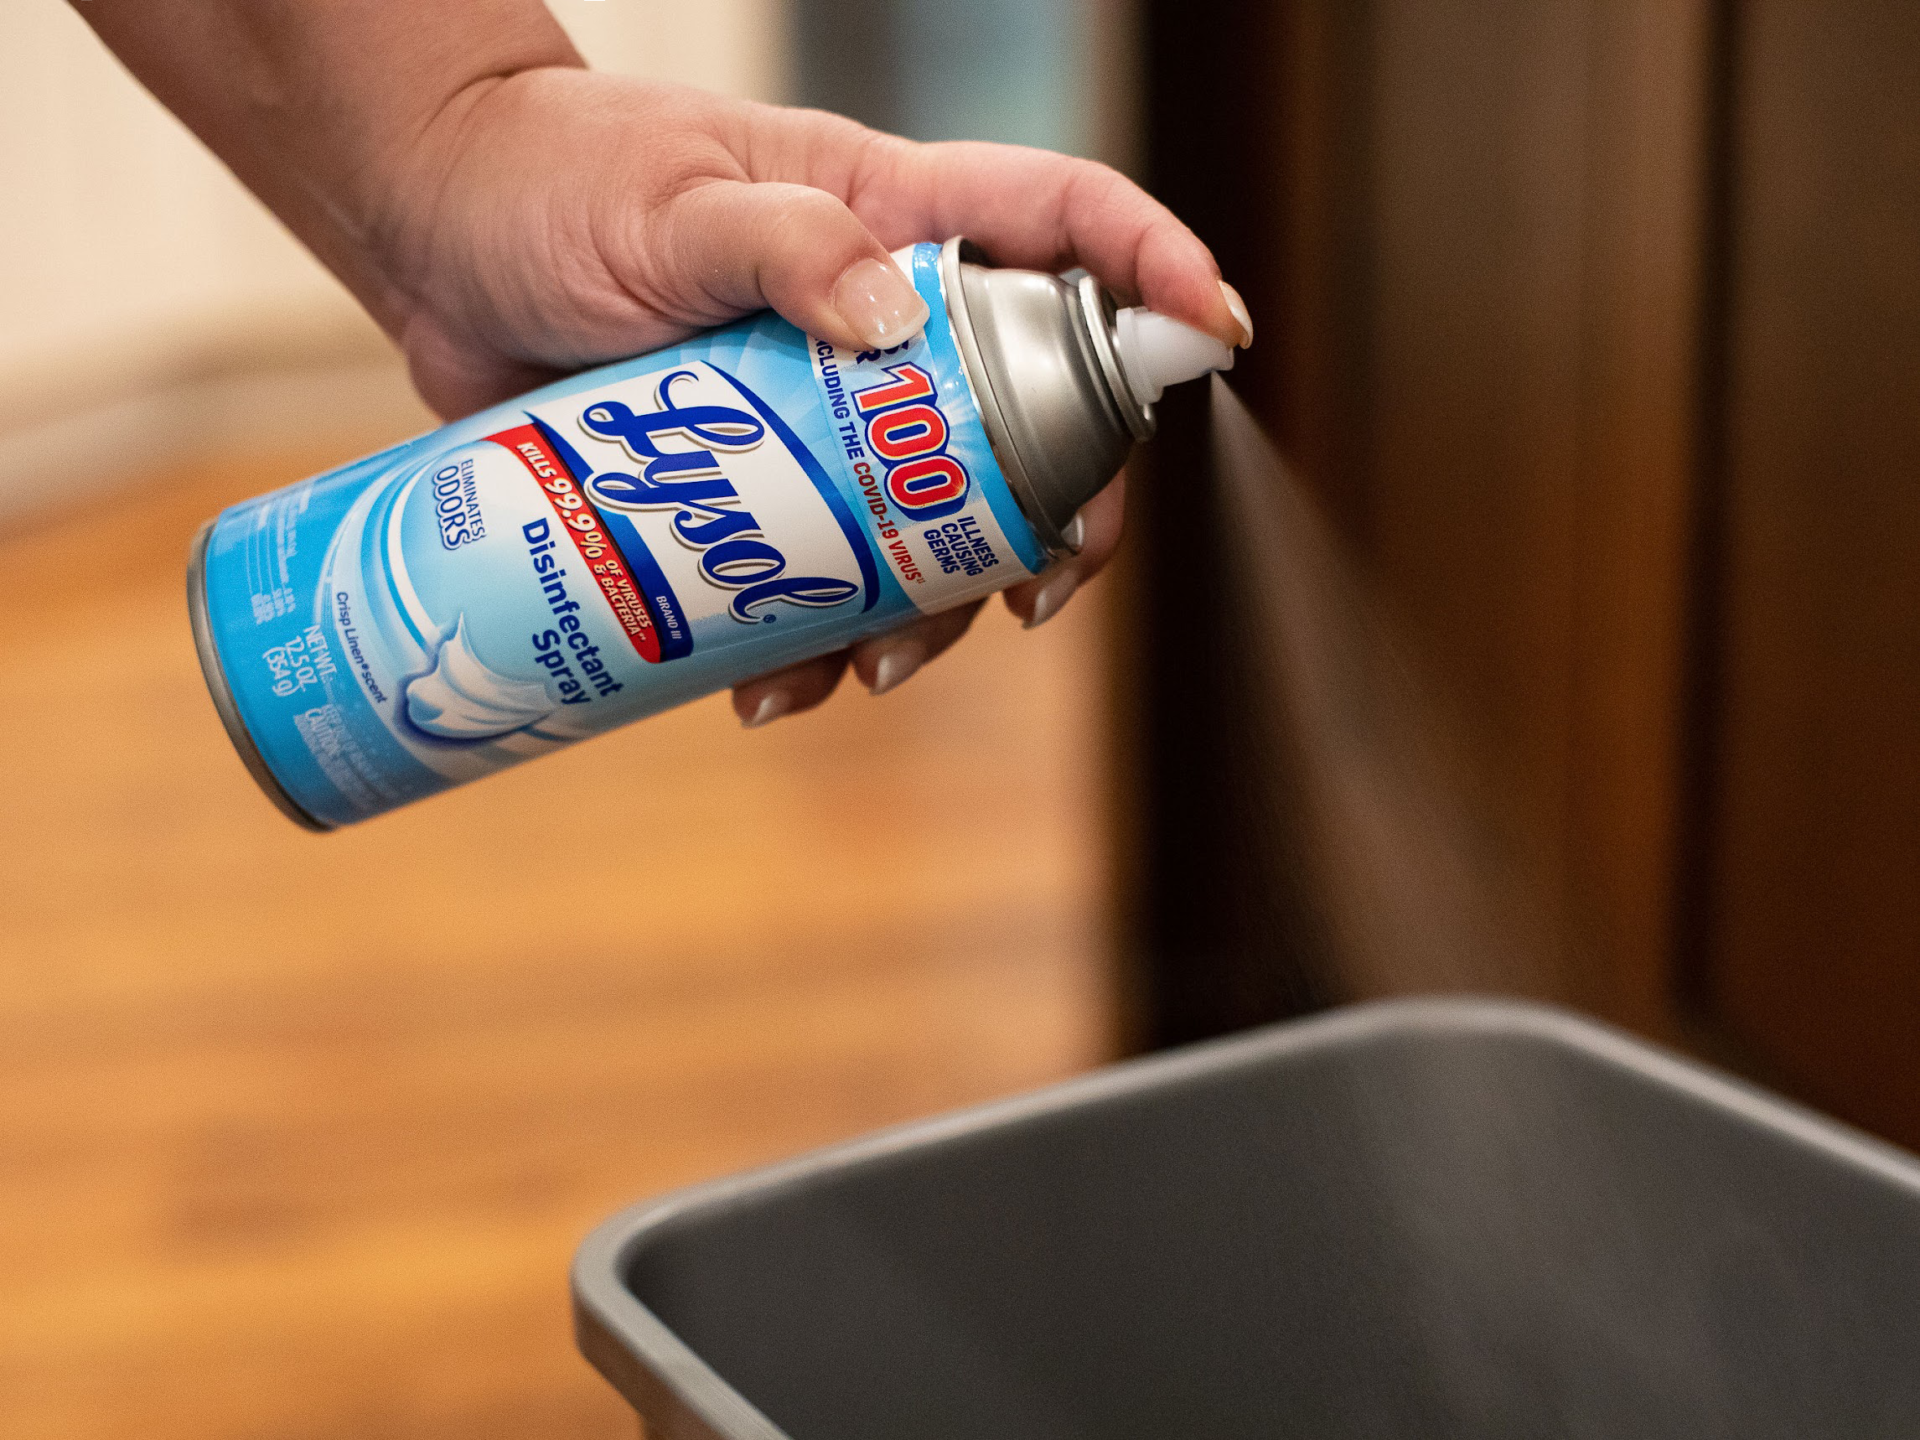 Grab A Discount On Lysol Disinfectant Spray At Kroger – Best Deal Ends Soon!